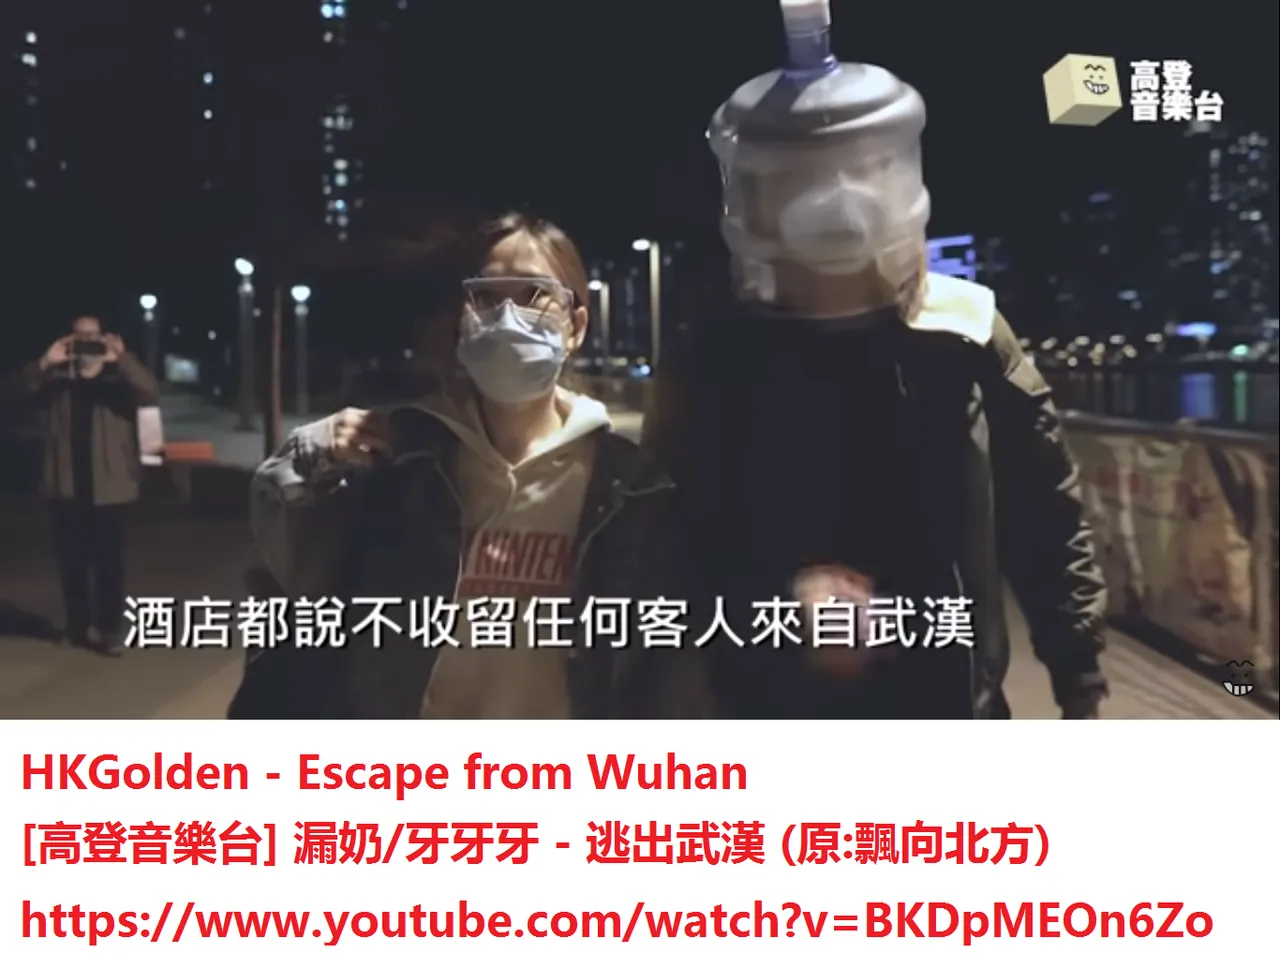 escapefromwuhan.png